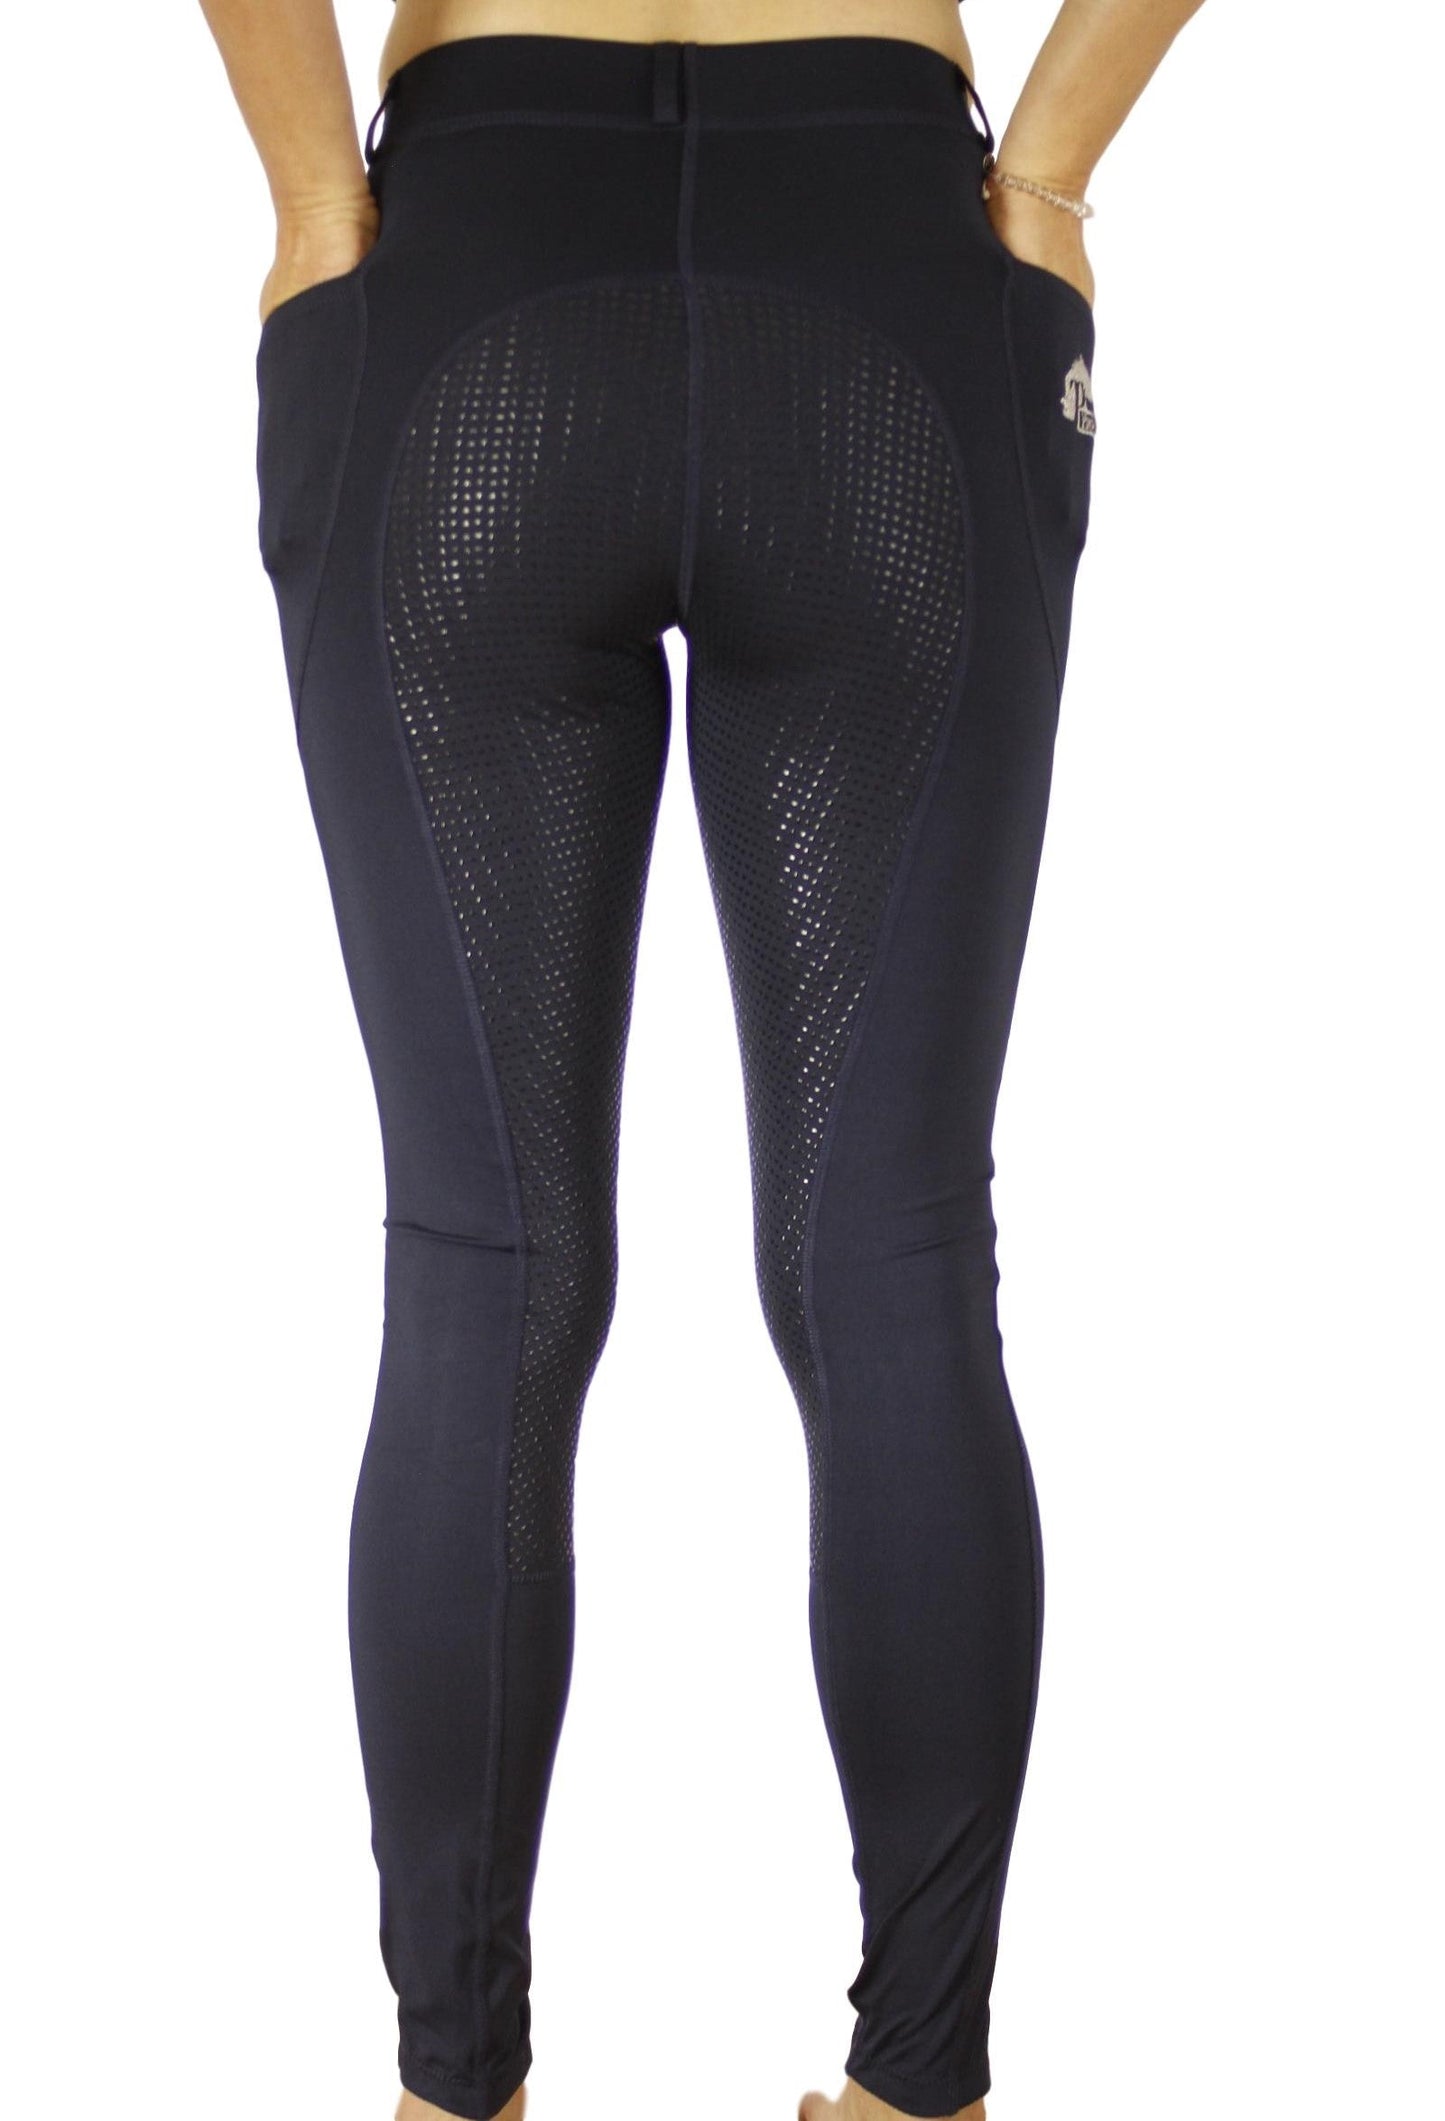 Person standing wearing black horse riding tights with grip patterns.